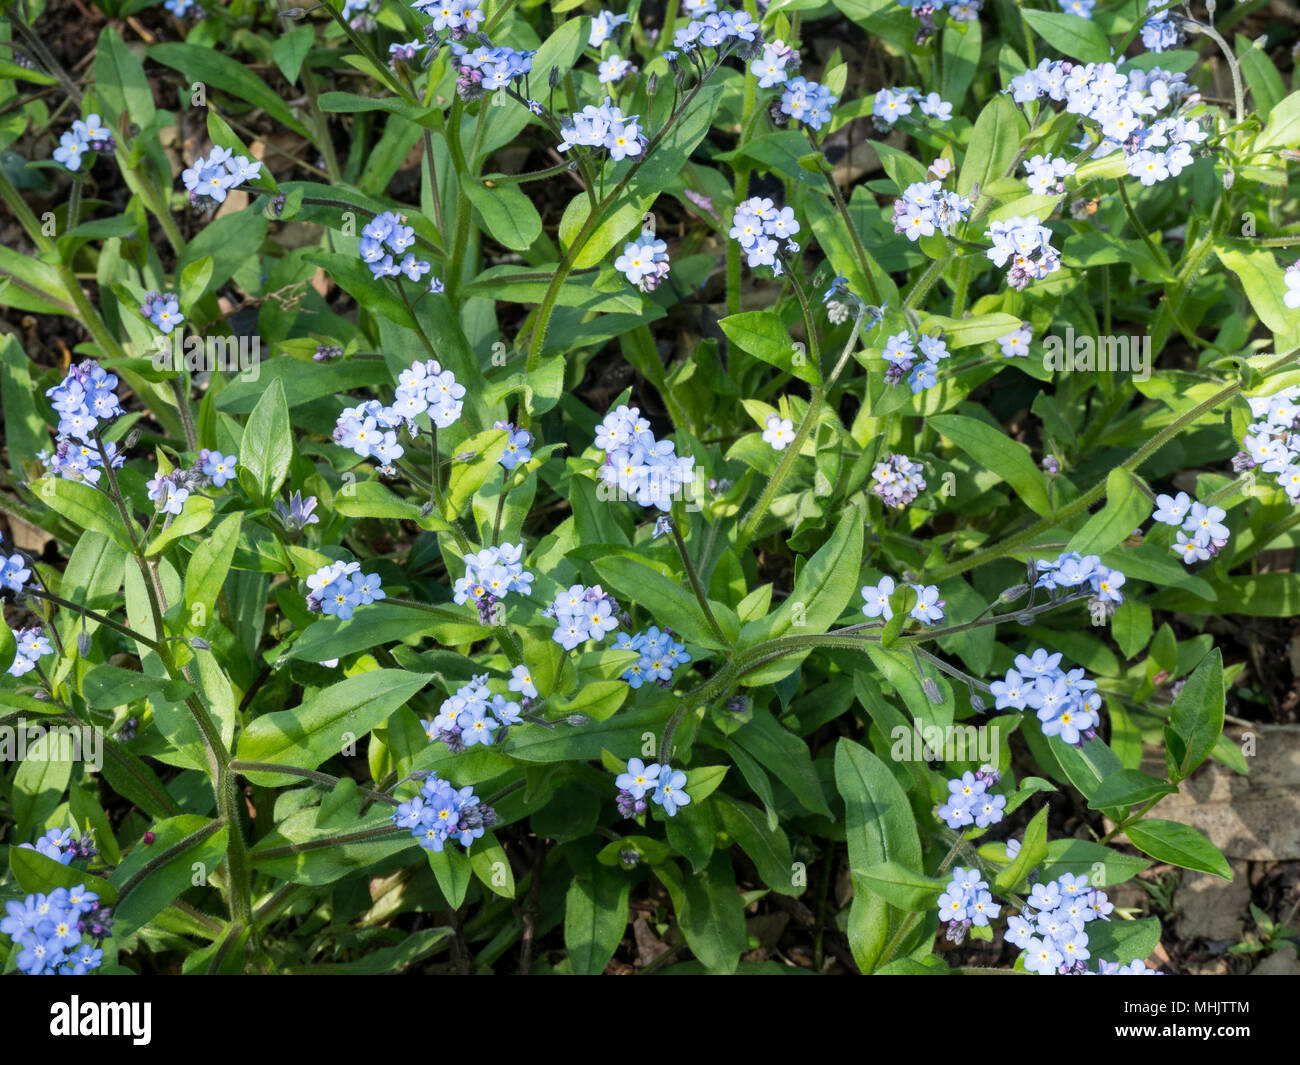 A frame filling image of the pale blue flowers and green foliage of the Forget Me Not, Myosotis sylvatica Stock Photo